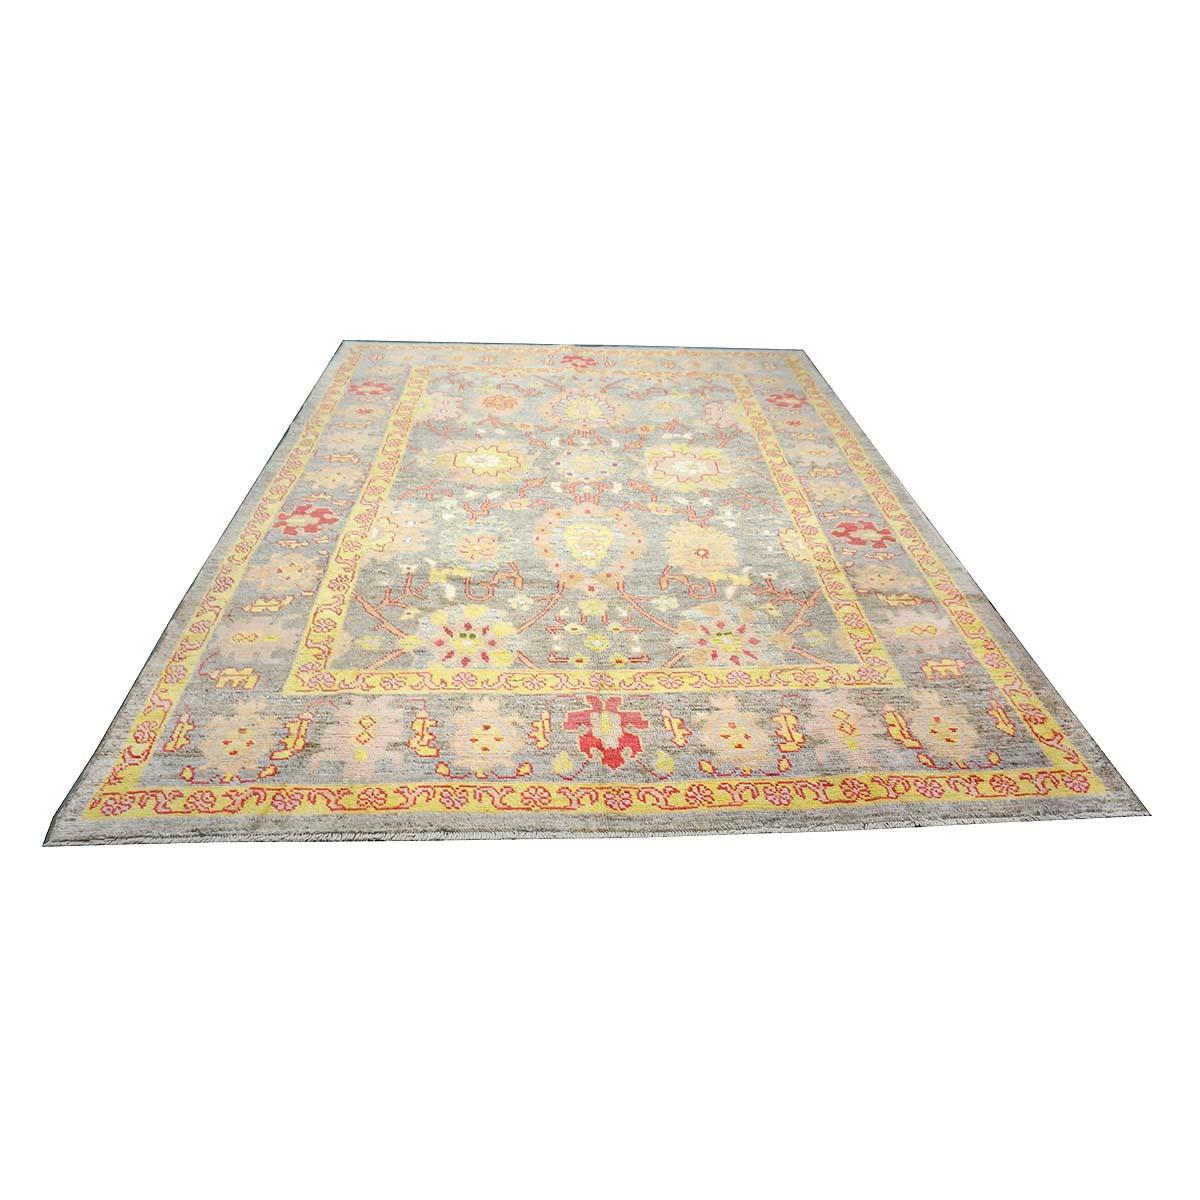  Ashly Fine Rugs presents a 21st-century Persian Oushak 8x10 grey, red, & yellow handmade area rug. Oushaks began in a location just south of Istanbul, in a region that was to become the rugs namesake, Oushak. Although nomads first produced the rugs